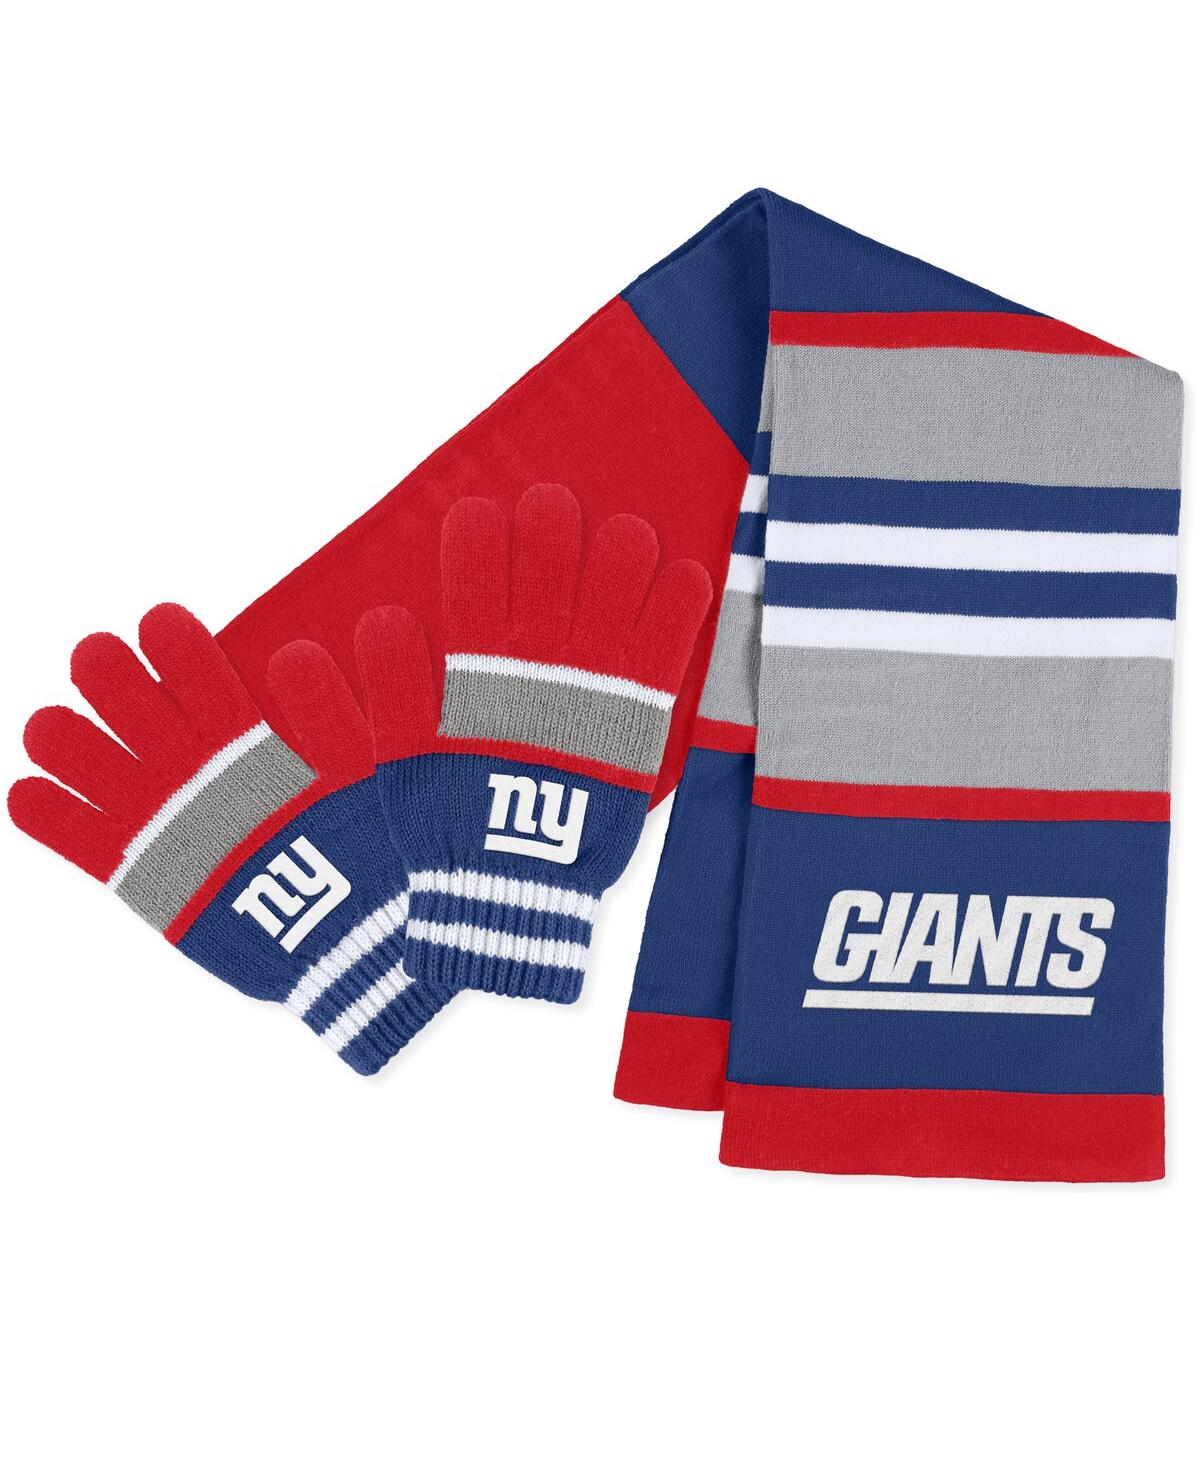 Women's Wear by Erin Andrews New York Giants Stripe Glove and Scarf Set - Red, Blue